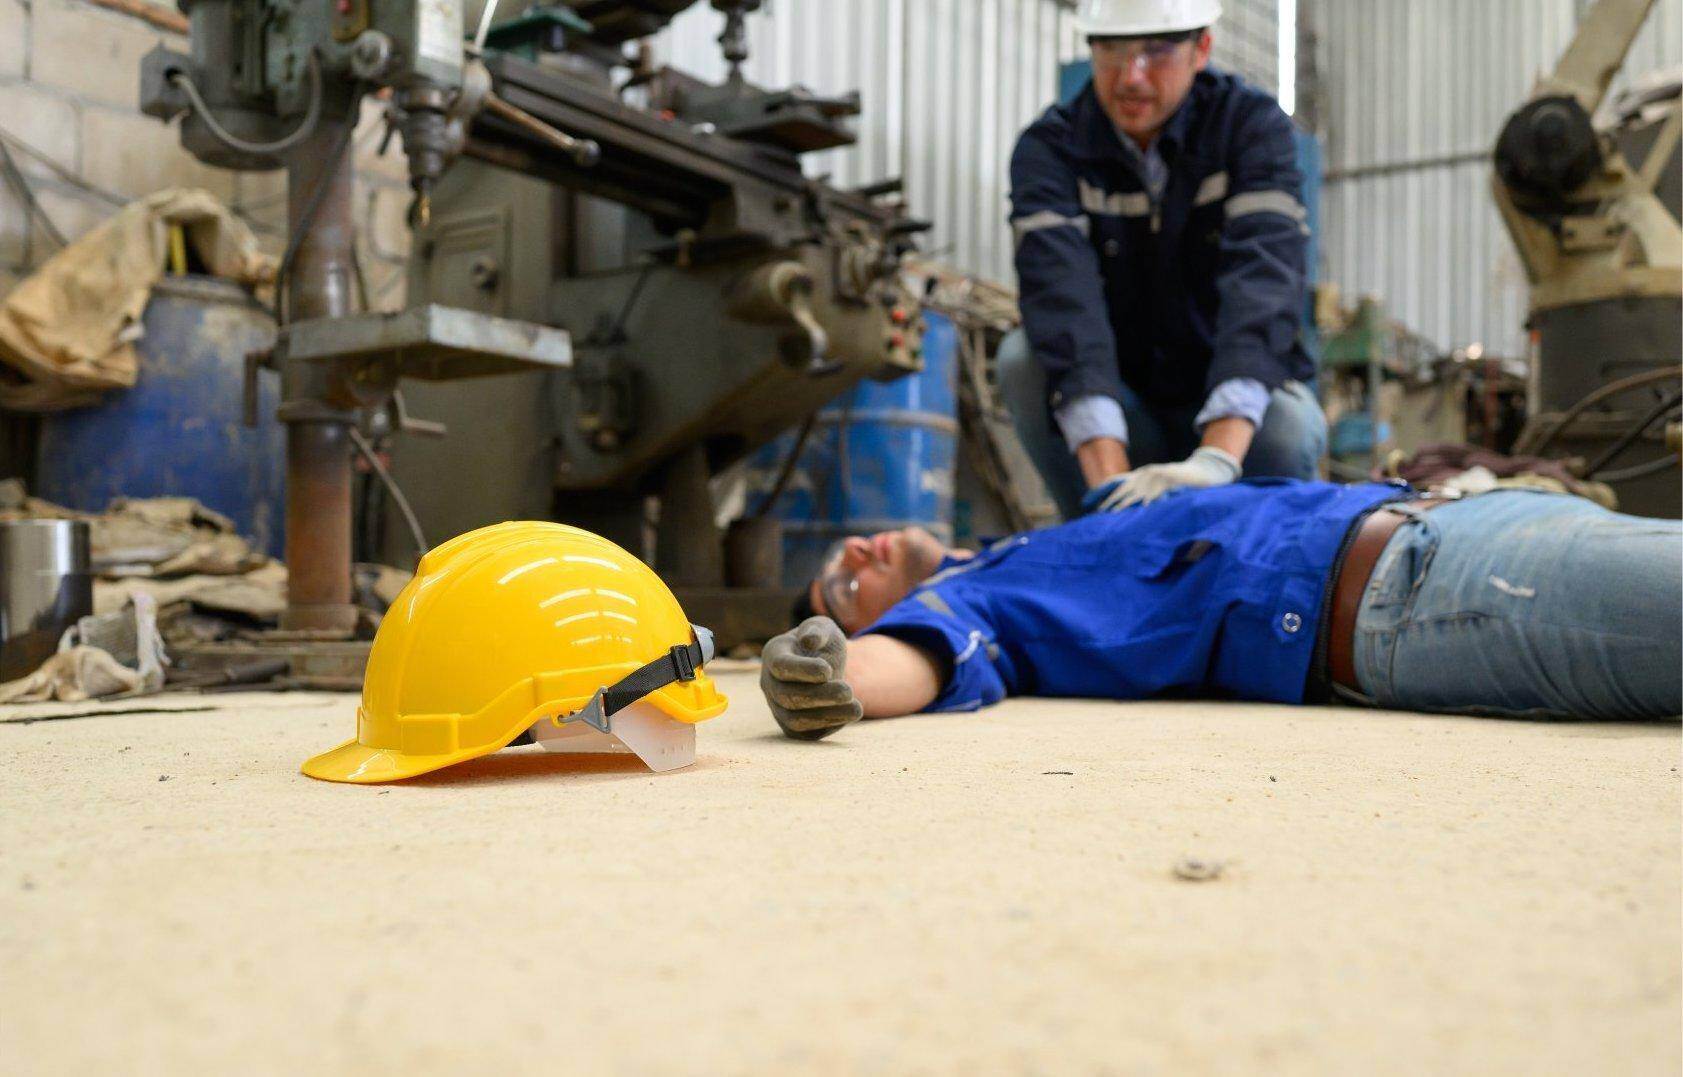 An unconscious man who has been injured on the job who will file for workers compensation in Acworth, Georgia